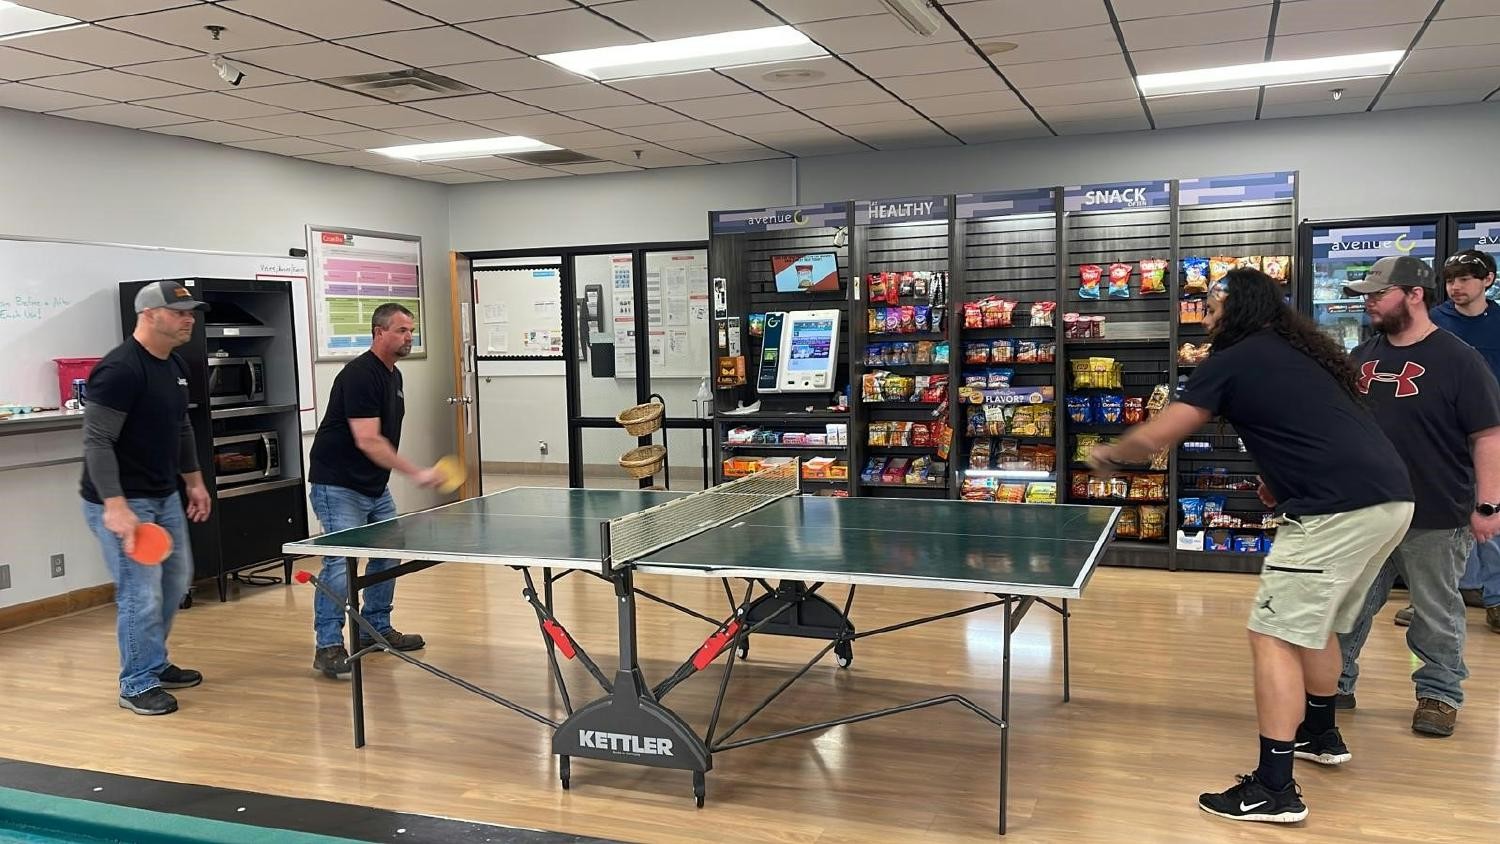 Oak Ridge, Tennessee employees participating in a ping pong tournament to raise money for Family for Families program.